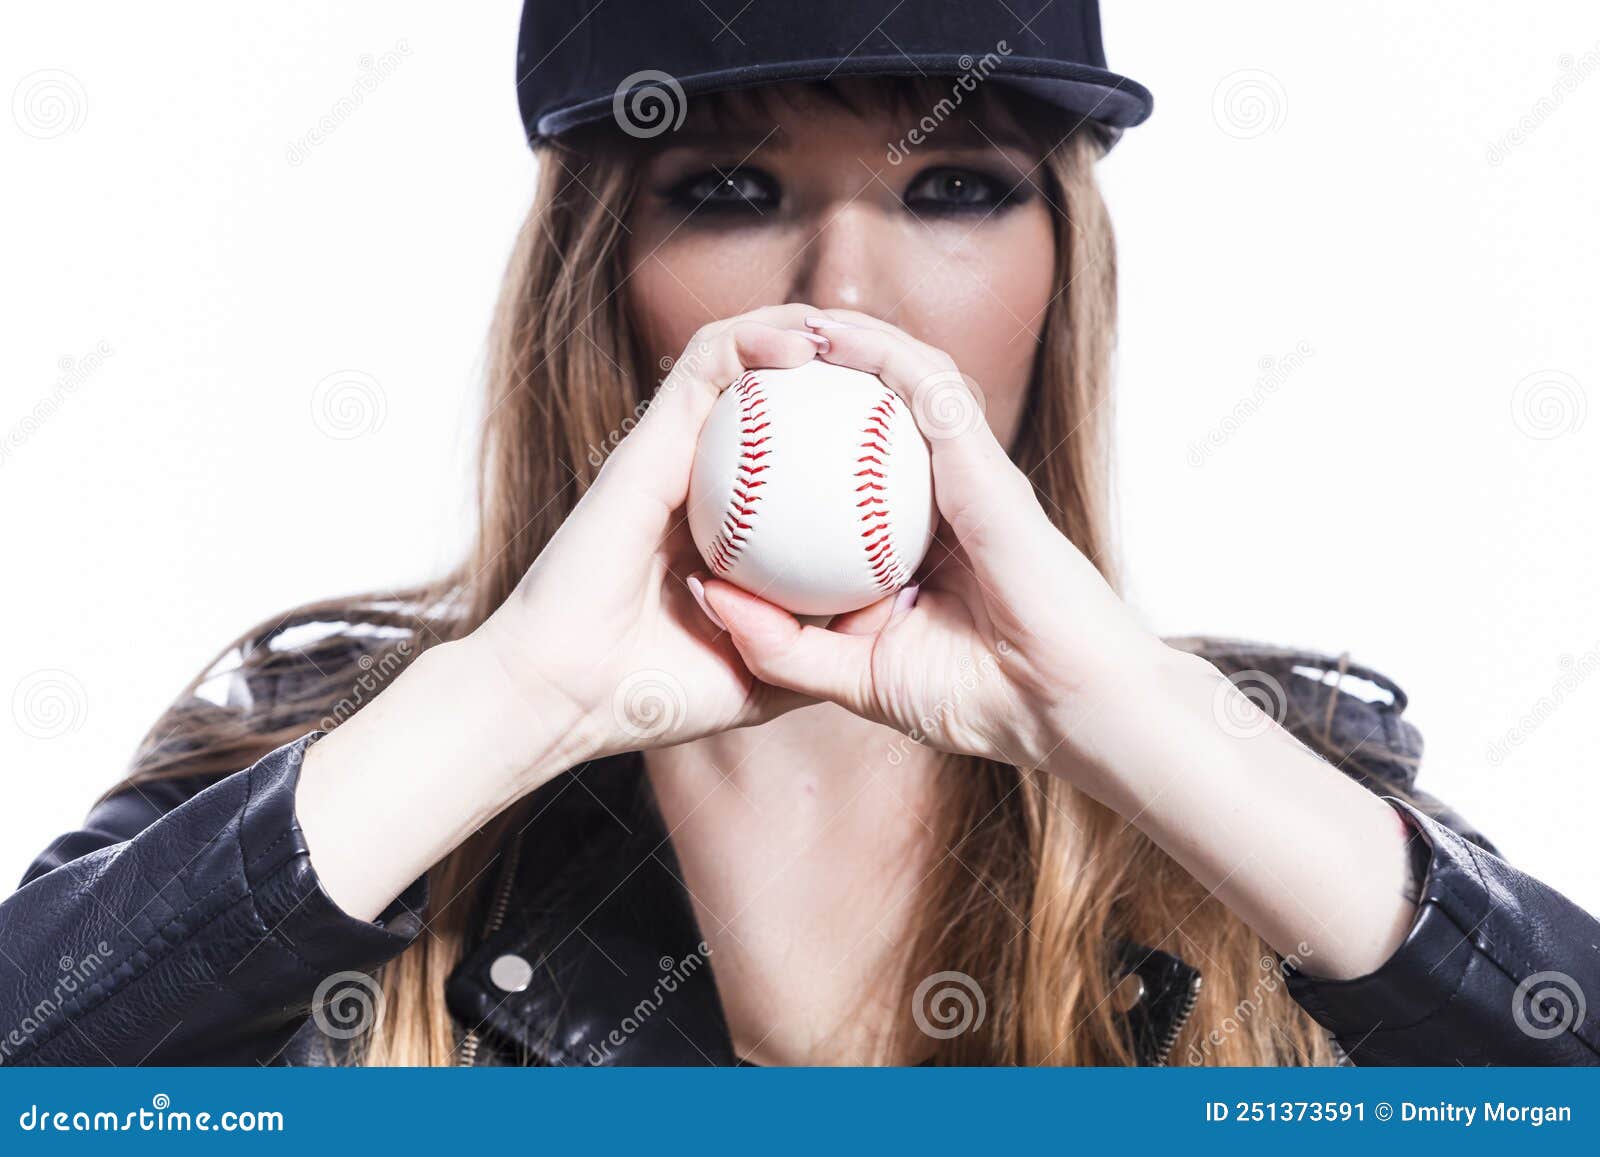 Closeup of One Sportive Caucasian Female Baseball Player Athlete Posing  with Ball Wearing Black Cap Sport Outfit Against Pure Stock Image - Image  of competitive, activity: 251373591